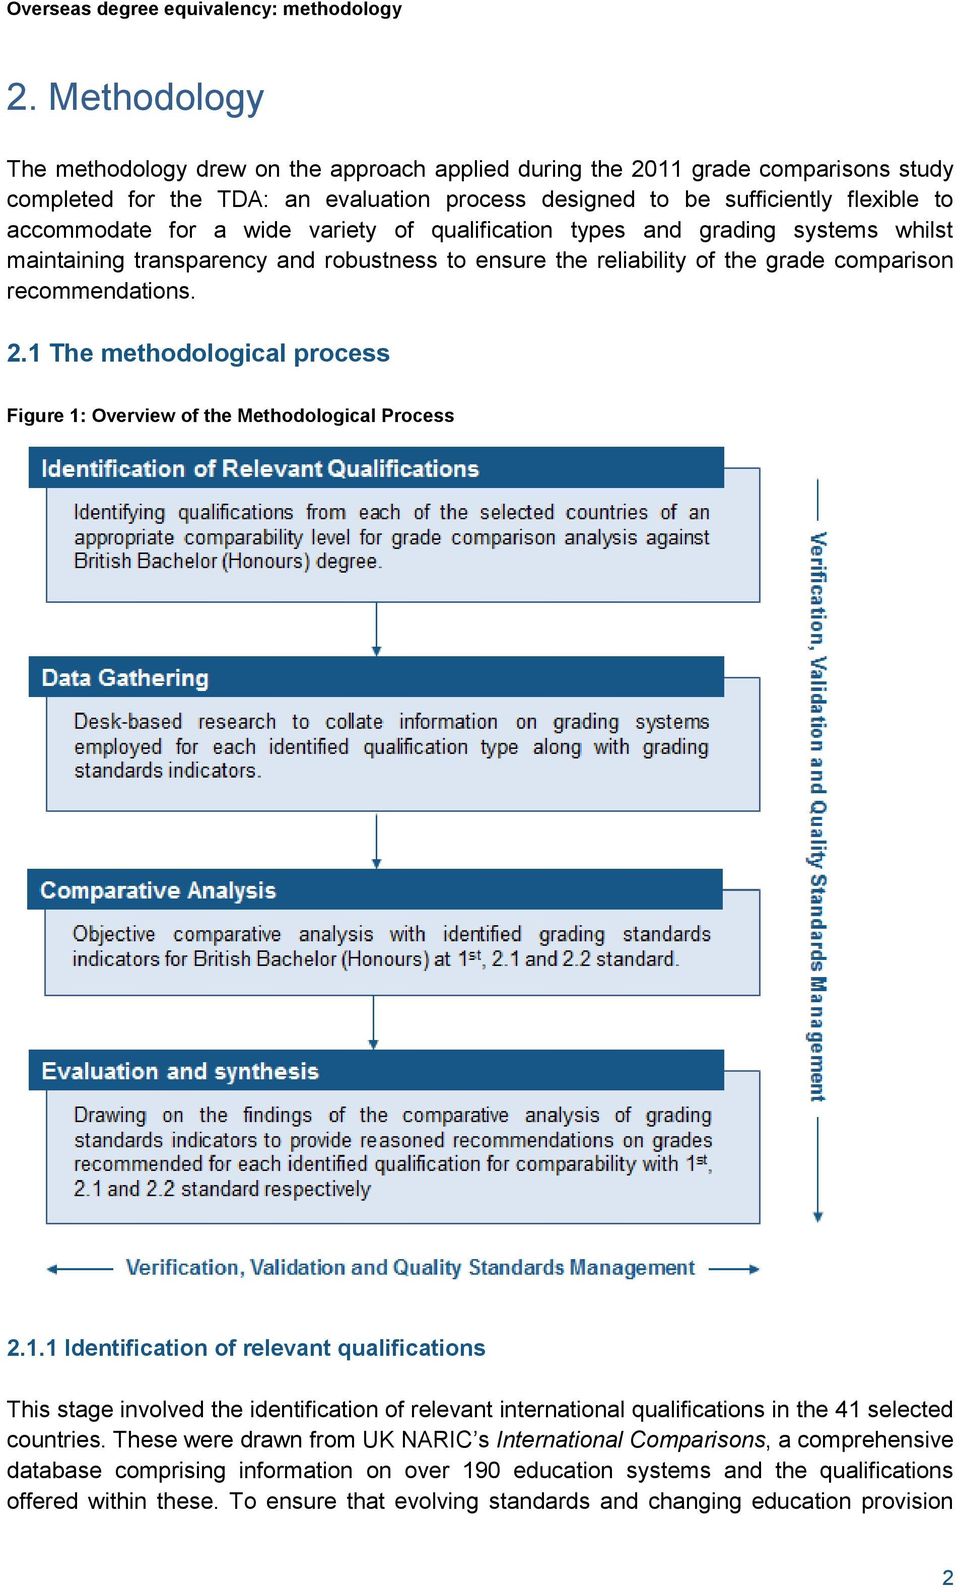 1 The methodological process Figure 1: Overview of the Methodological Process 2.1.1 Identification of relevant qualifications This stage involved the identification of relevant international qualifications in the 41 selected countries.